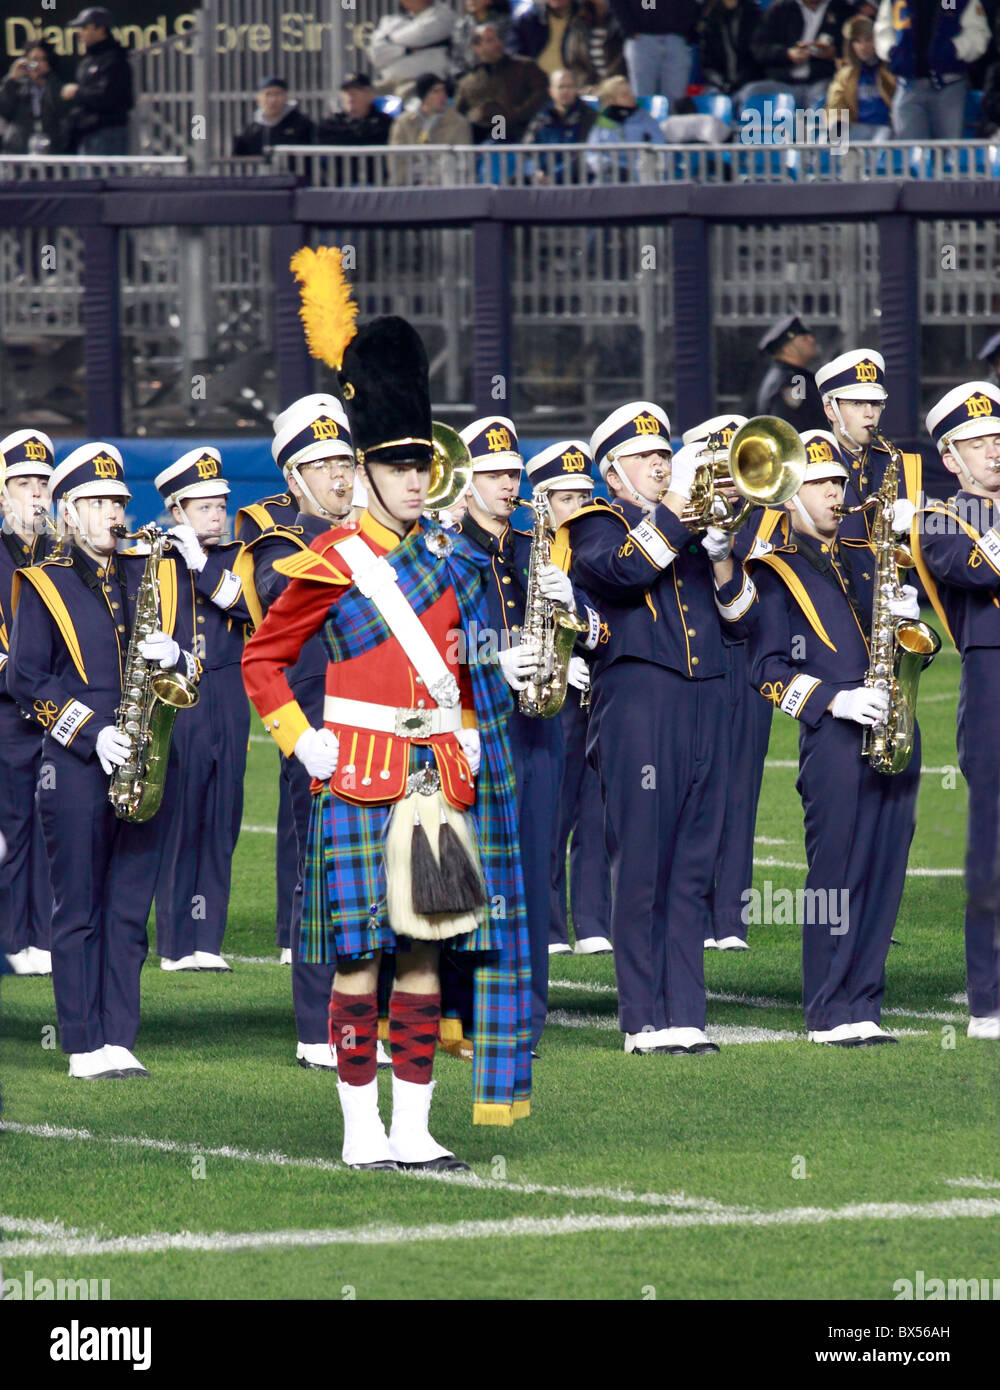 The Notre Dame marching band performs at halftime of the 50th Army vs. Dame college football Yankee Stadium Bronx NY Stock Photo - Alamy